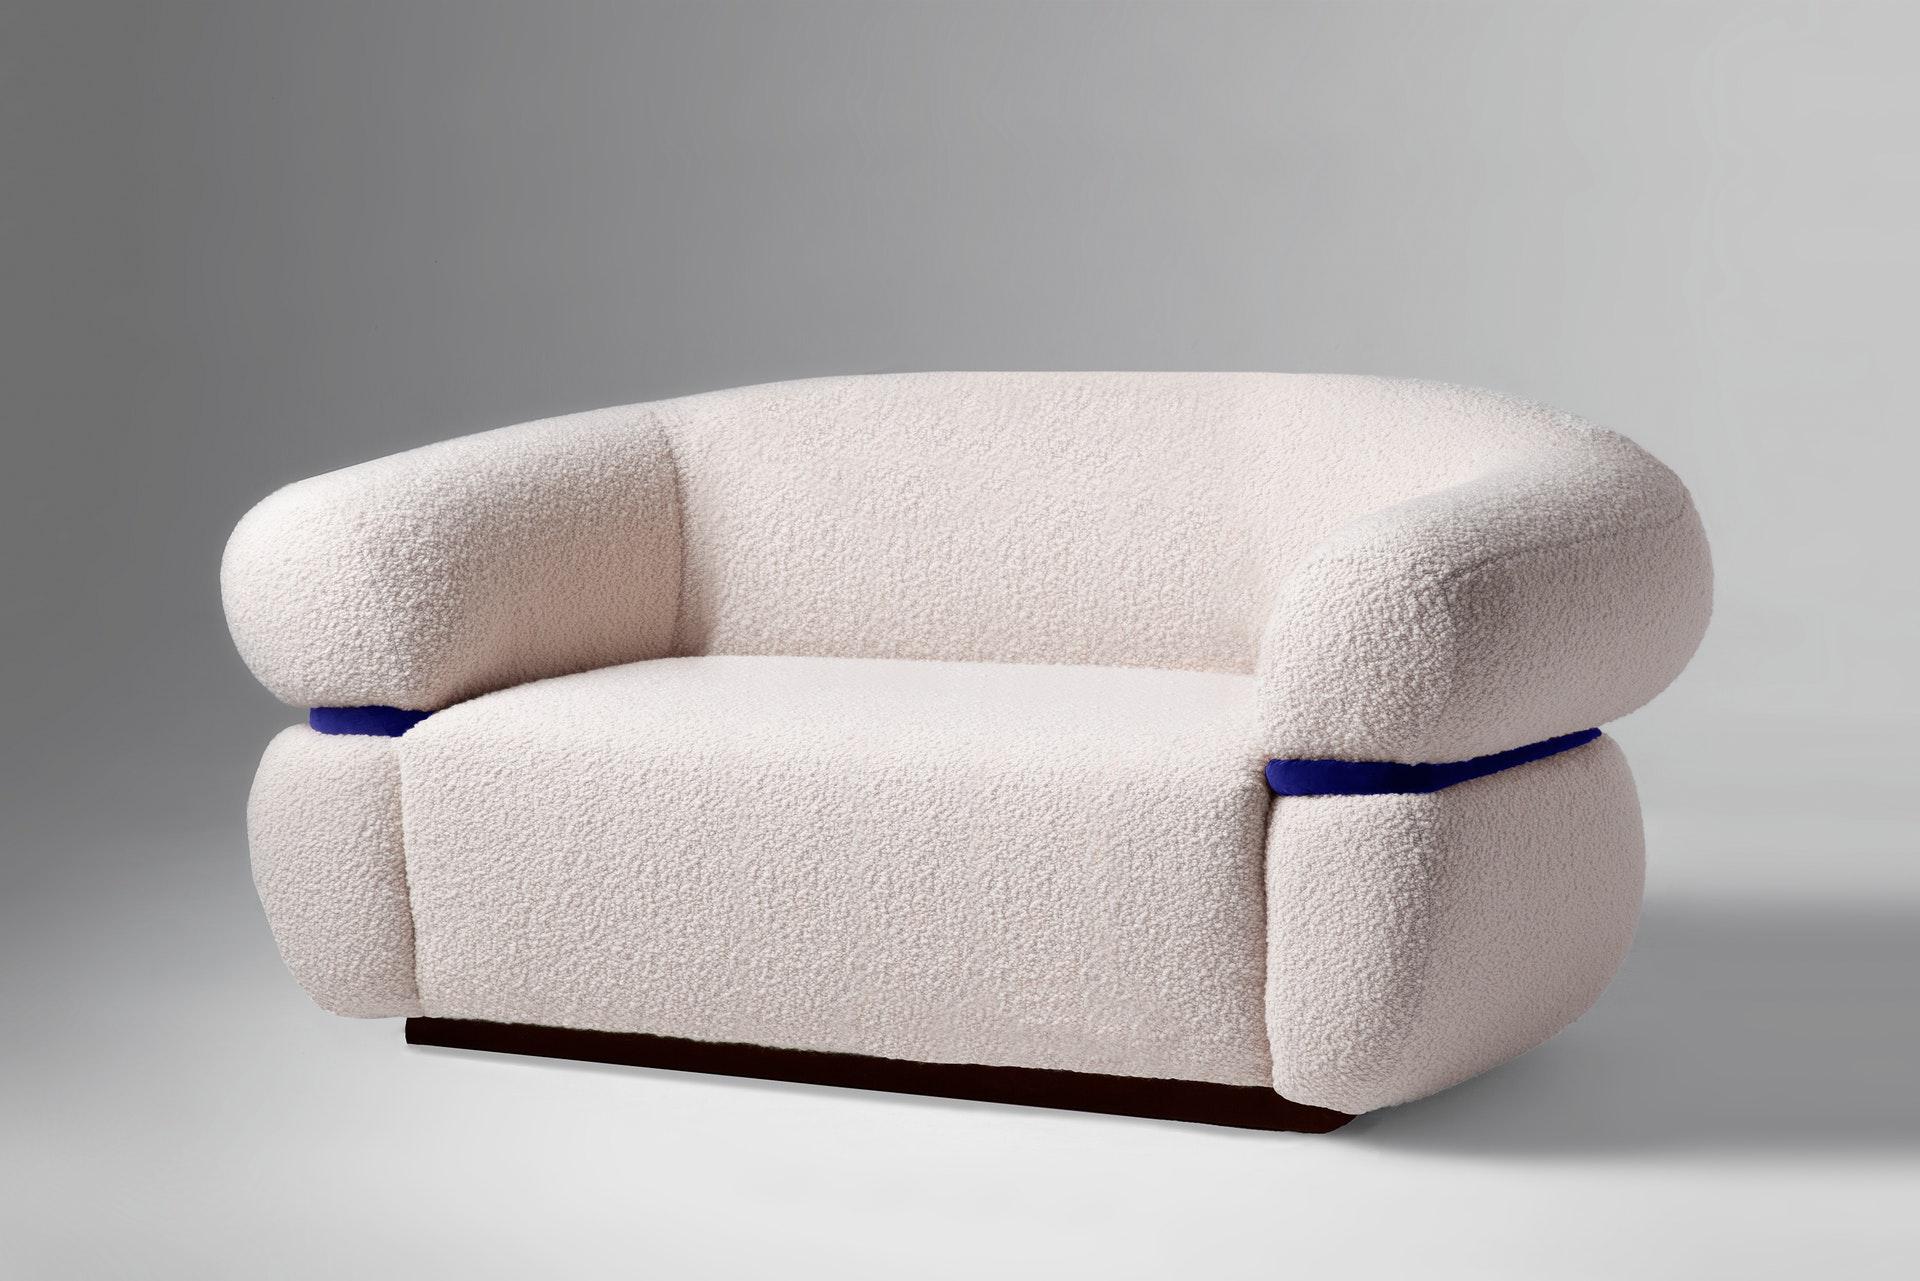  Like a warm embrace, Malibu Sofa welcomes you to stay within and relax. An elevated homage to the golden age of midcentury design and organic architecture, it radiates through its unusual proportions and strong curves with softness and Fine